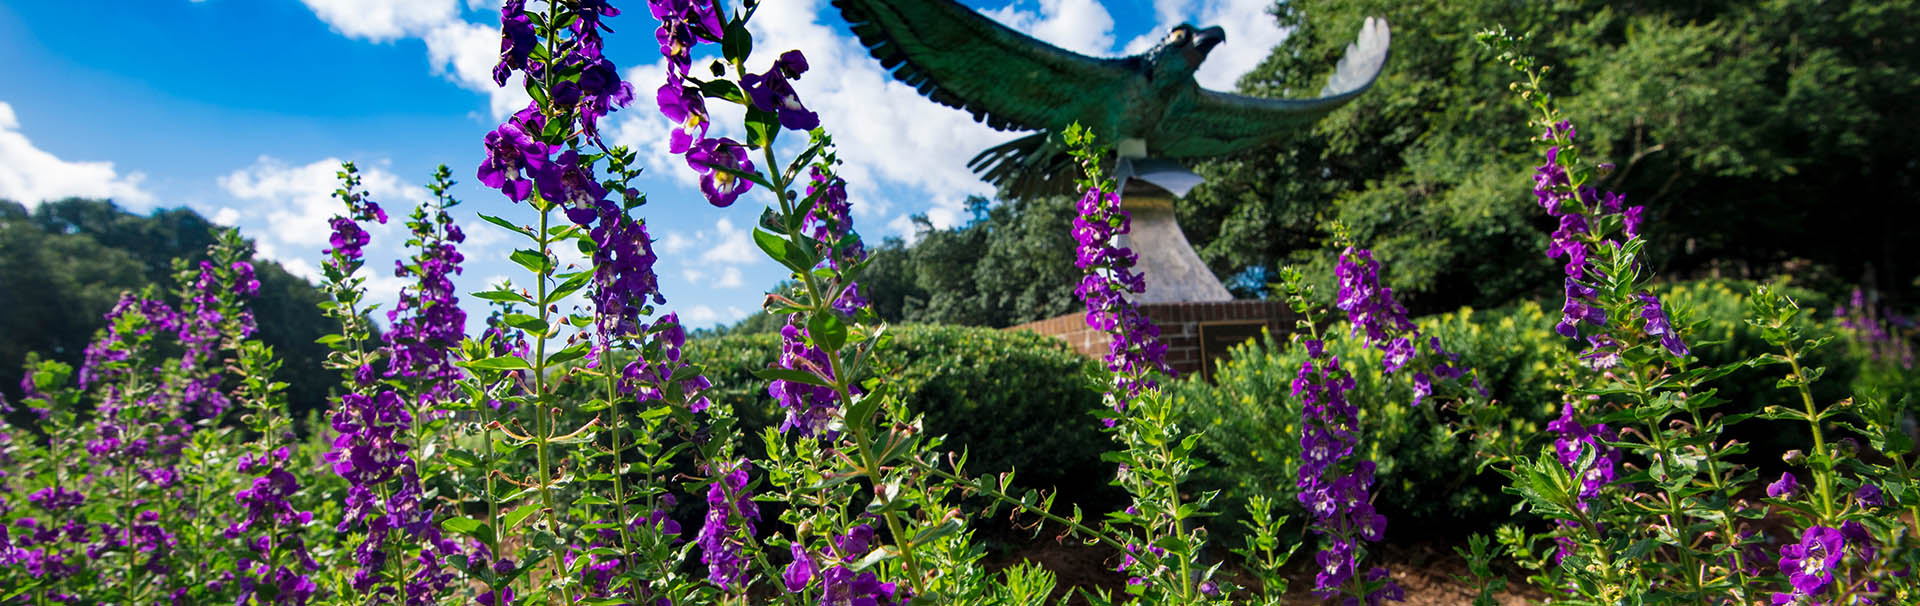 Seahawk statue in the front of campus surrounded by spring flowers.